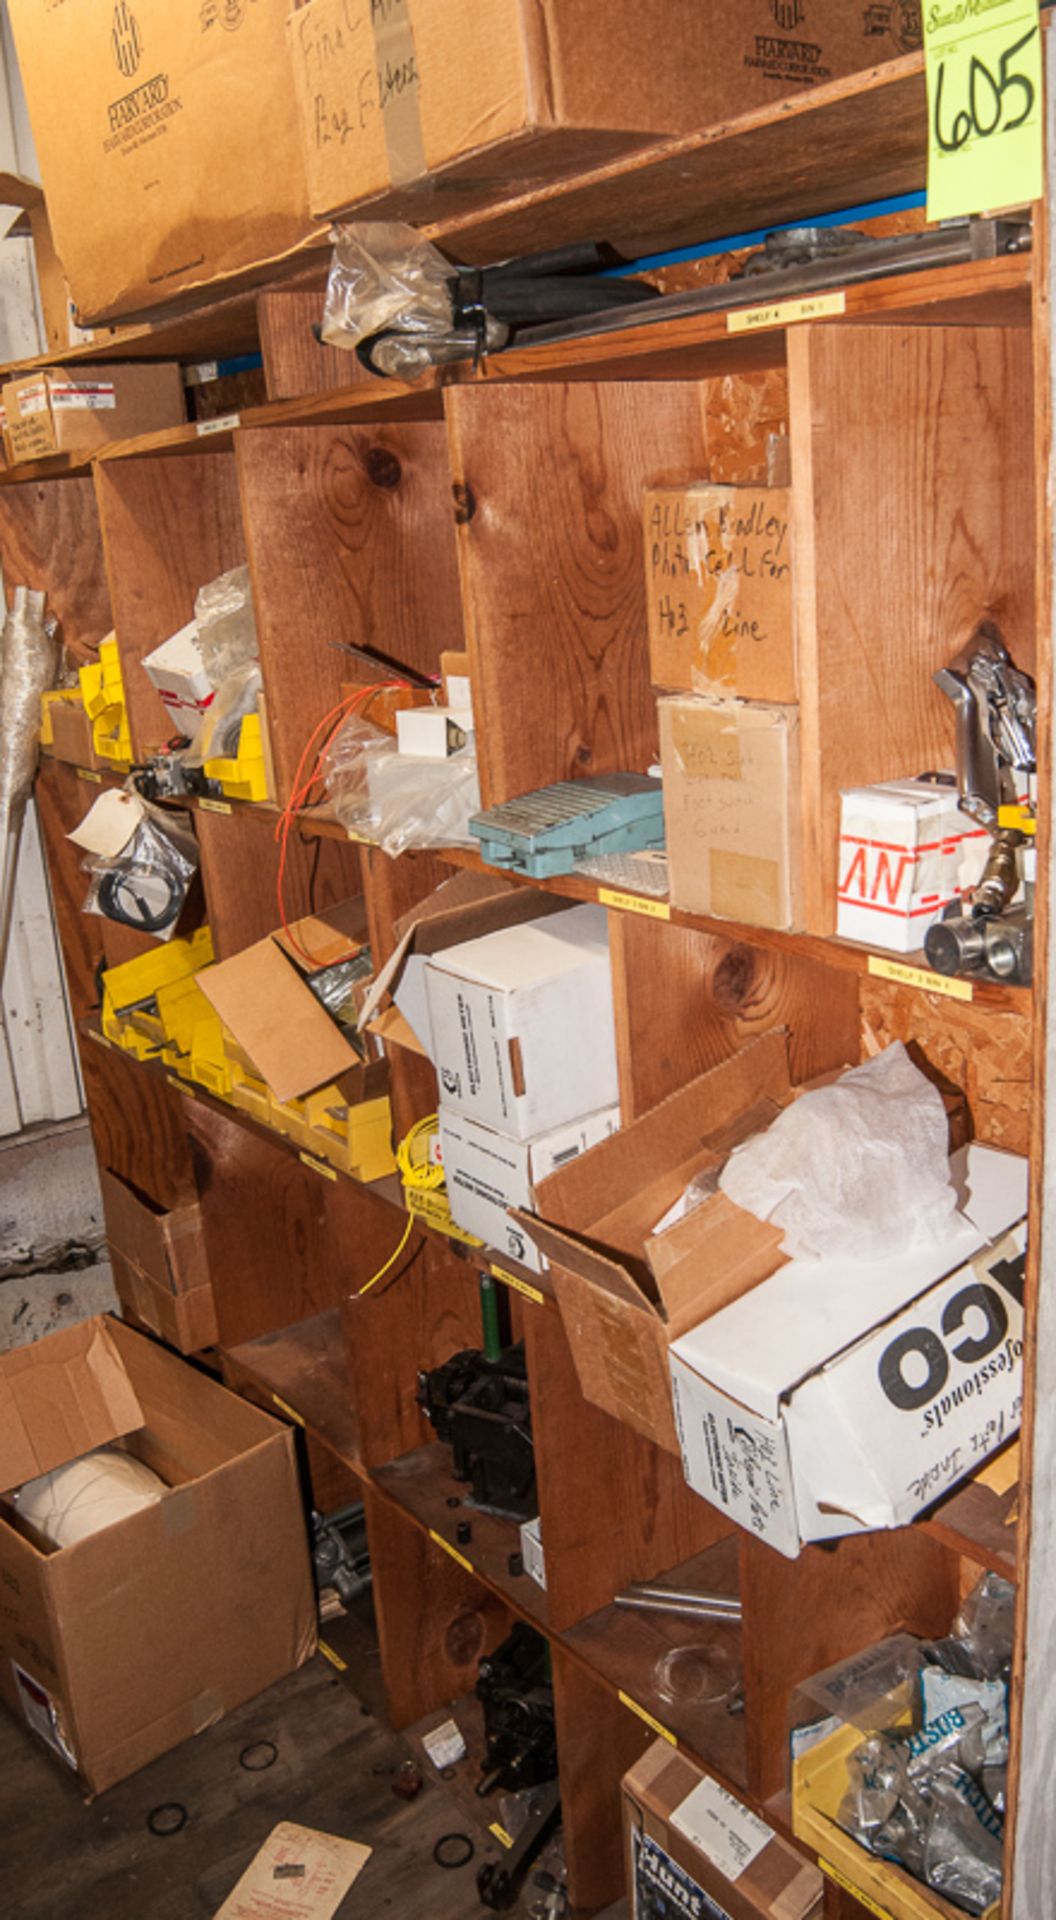 Contents of shelf, assorted electrical, hydraulic and machine parts